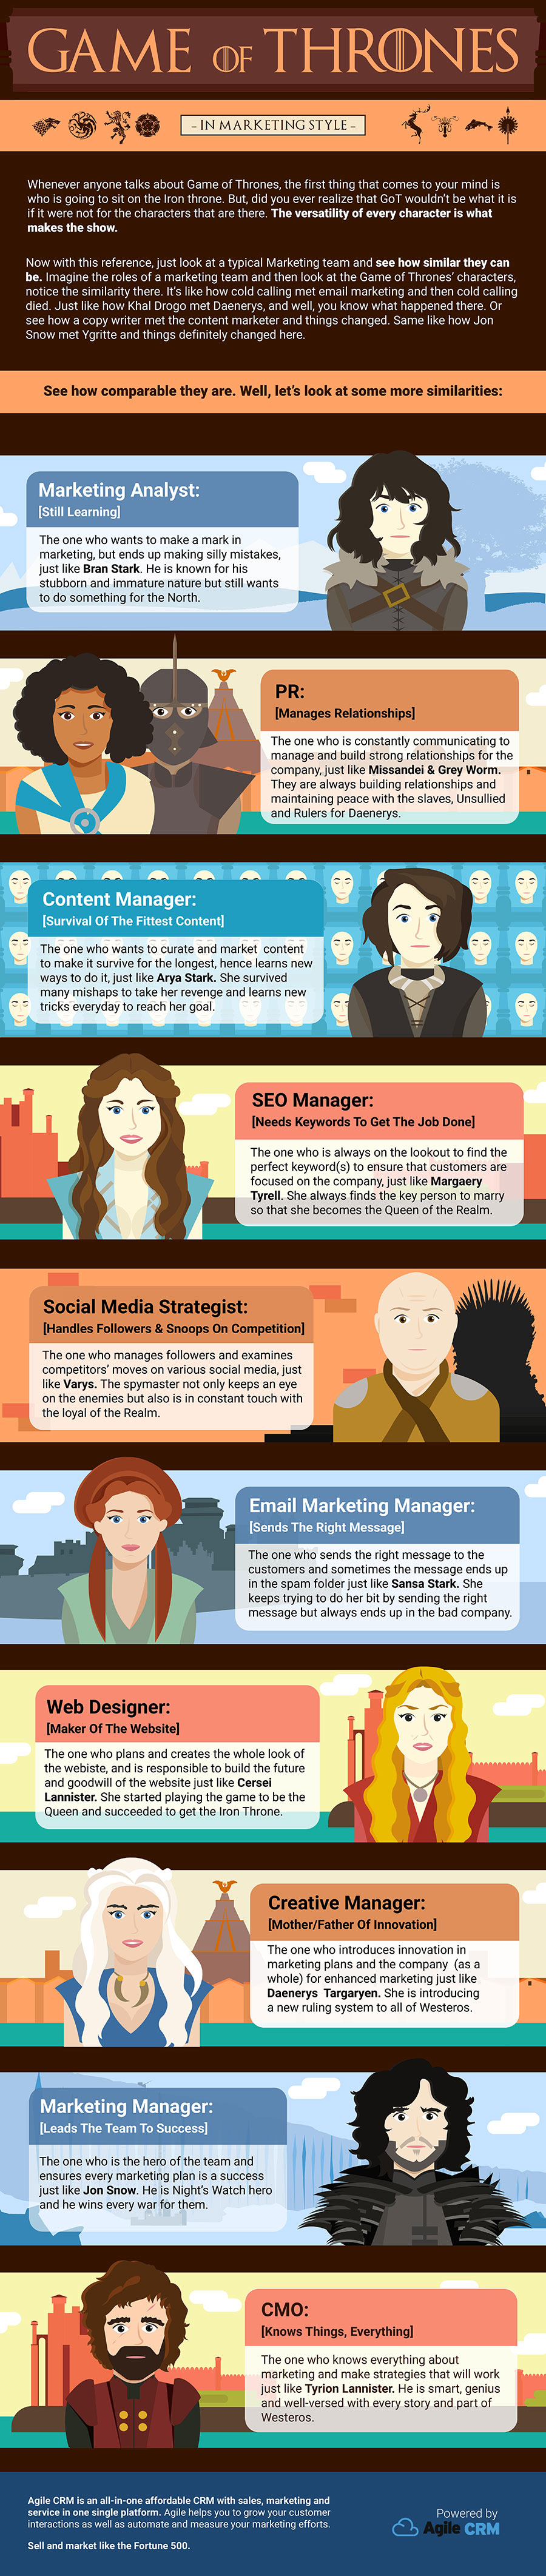 Game of Thrones (GoT) and marketing - infographic by Agile CRM